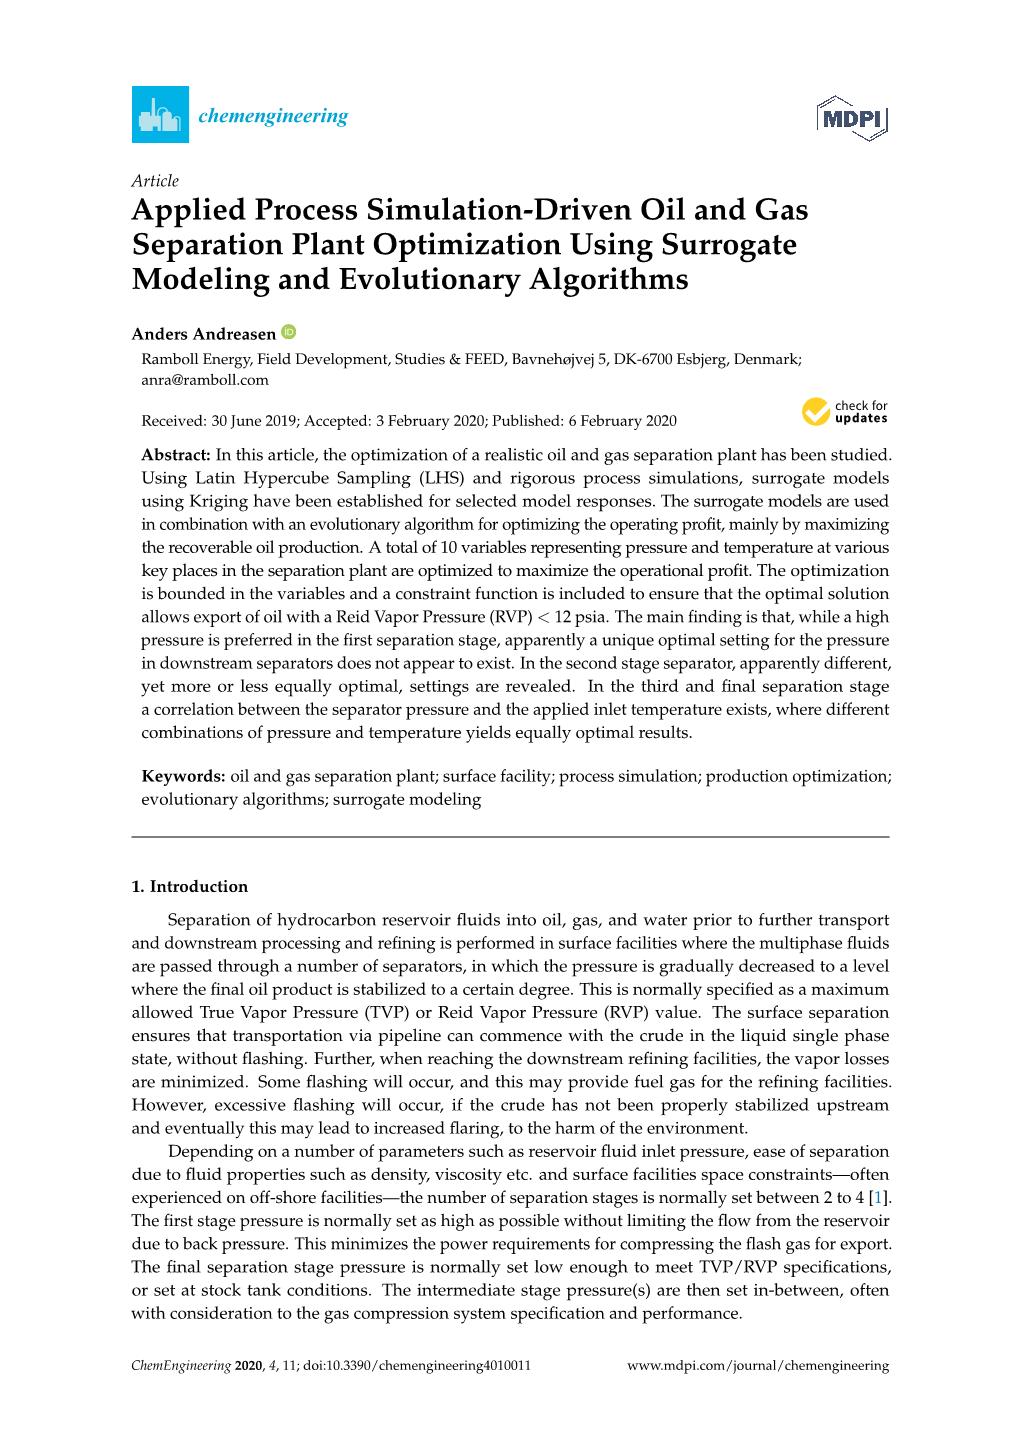 Applied Process Simulation-Driven Oil and Gas Separation Plant Optimization Using Surrogate Modeling and Evolutionary Algorithms